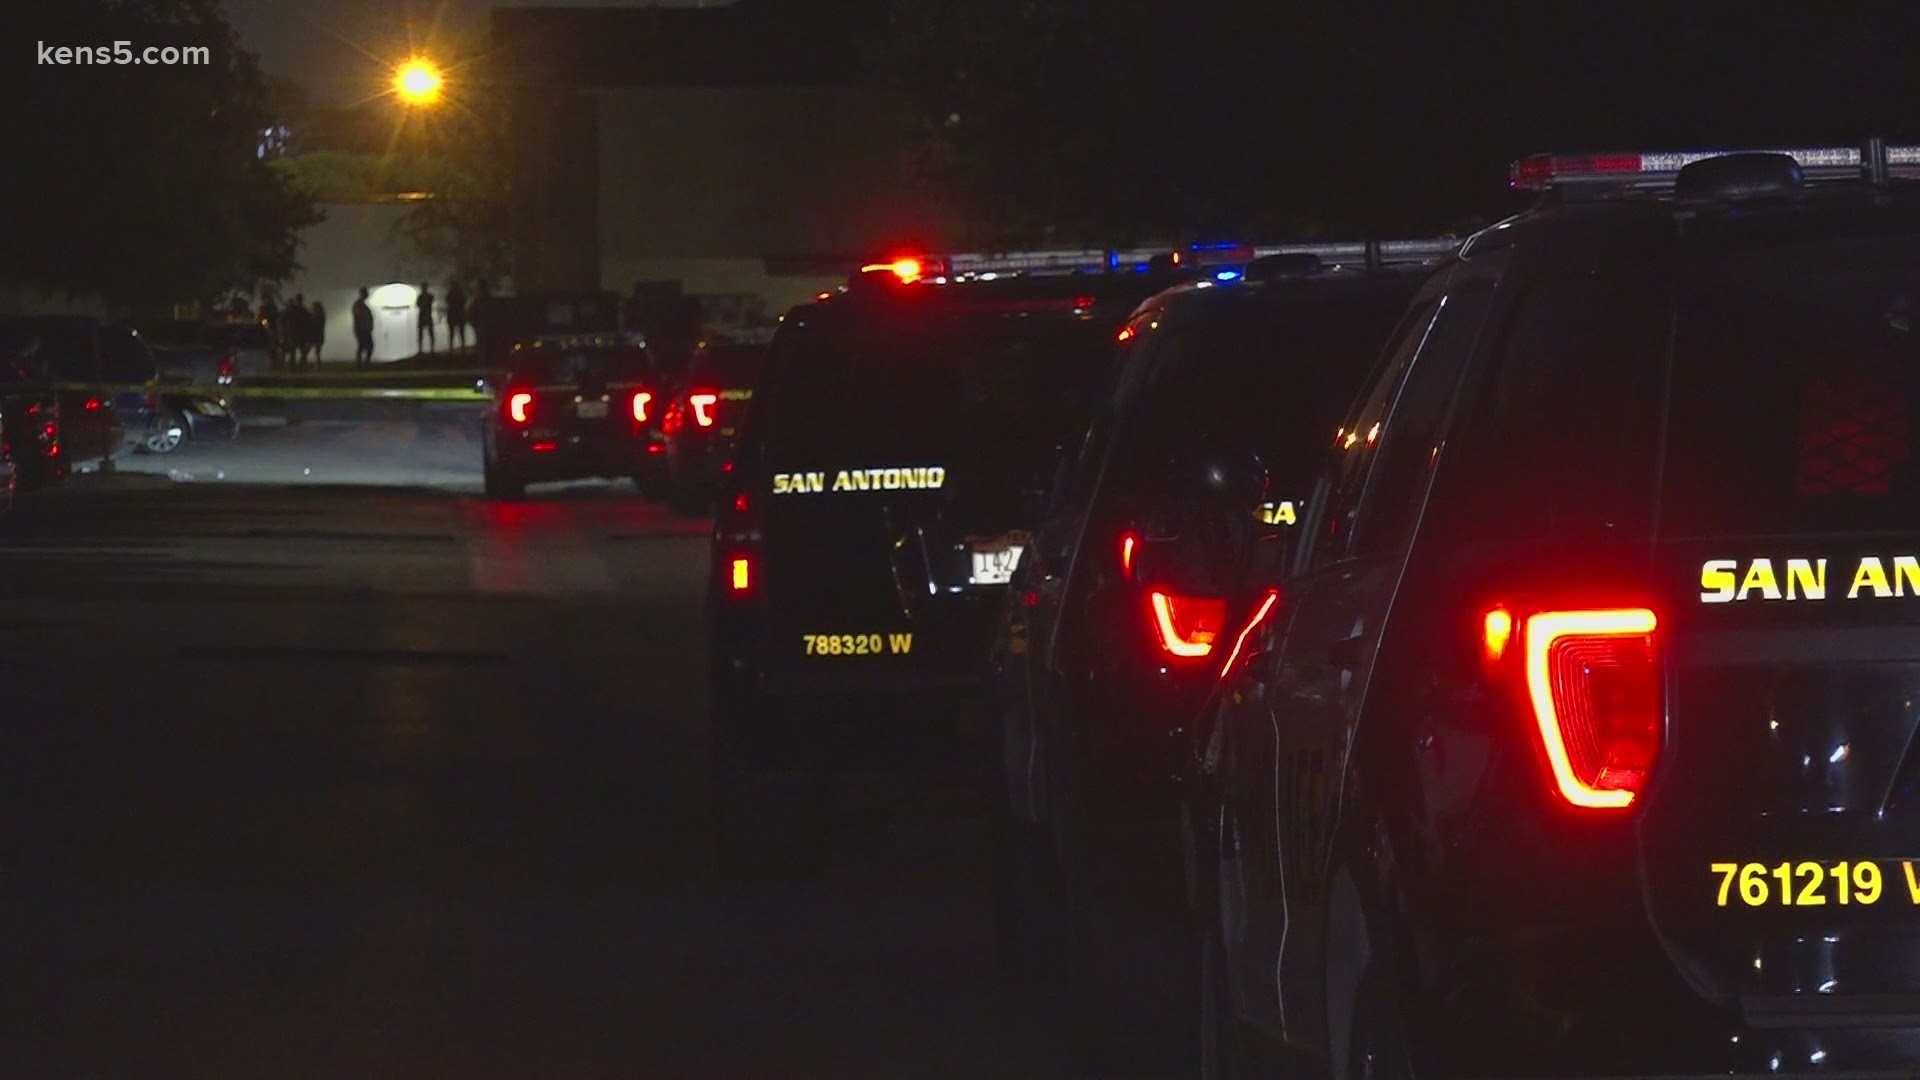 Witnesses told San Antonio police they saw the victim talking to three other men. They got into a fight and one of them reportedly shot the victim.